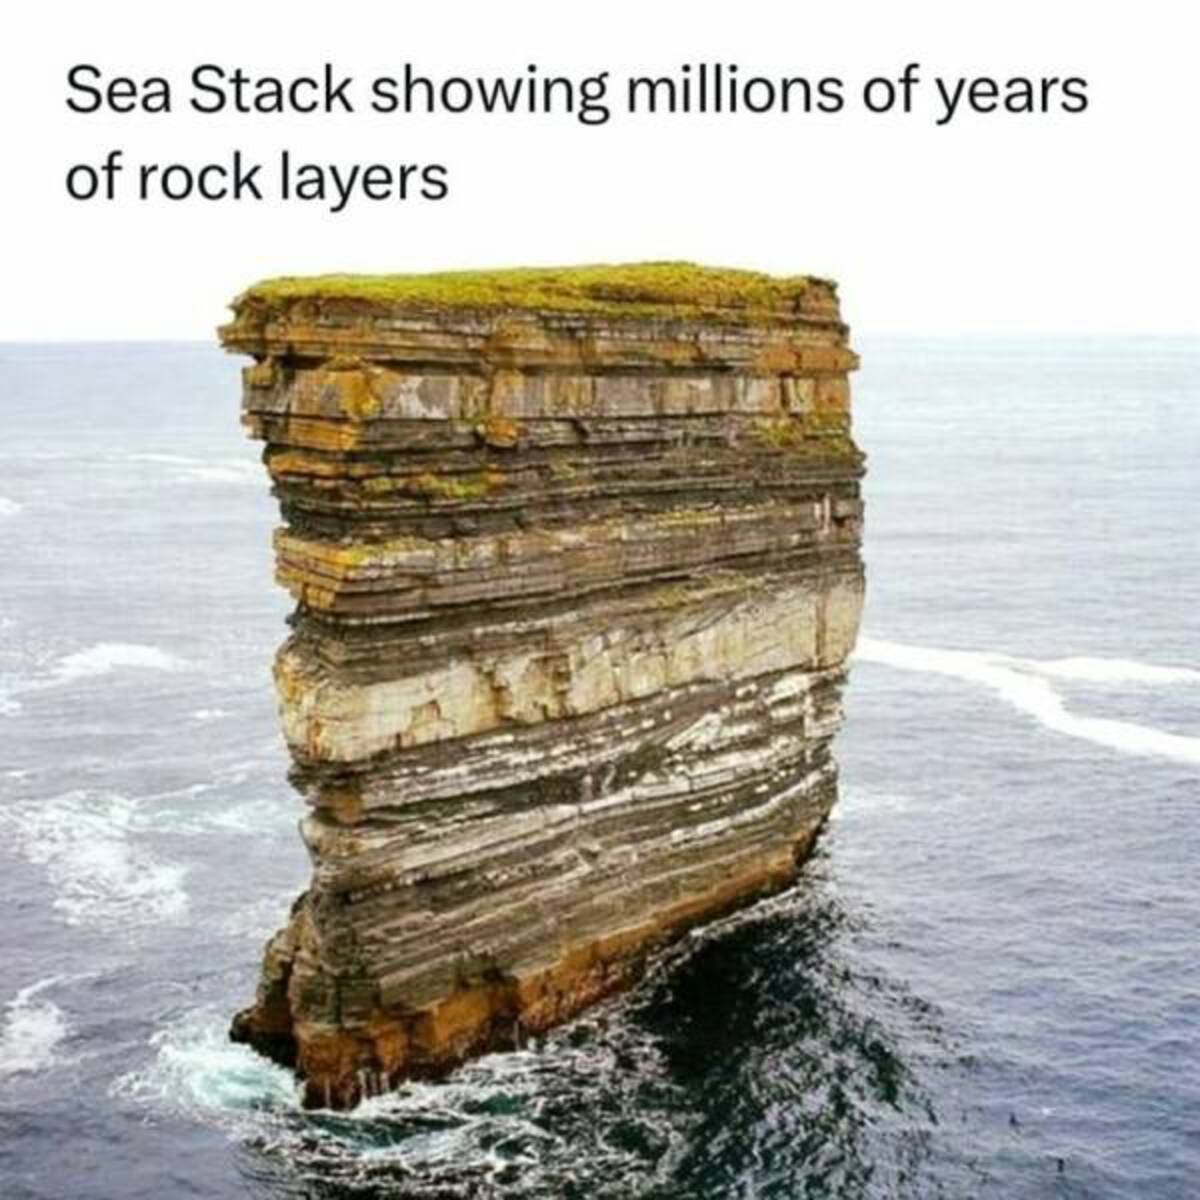 world in 350 million years - Sea Stack showing millions of years of rock layers